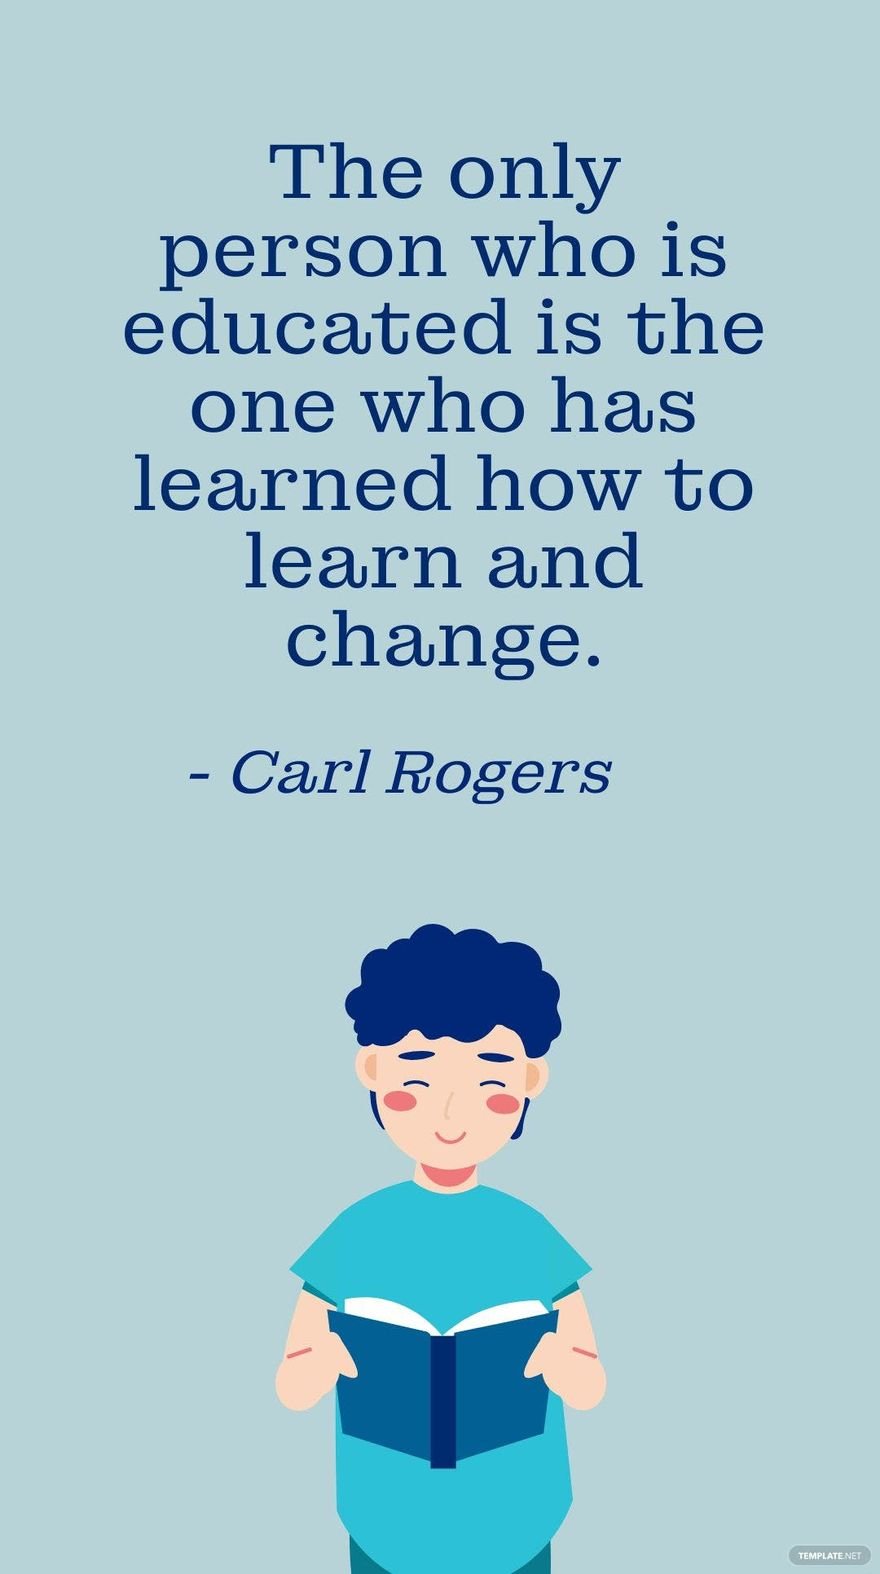 Free Carl Rogers - The only person who is educated is the one who has learned how to learn and change. in JPG